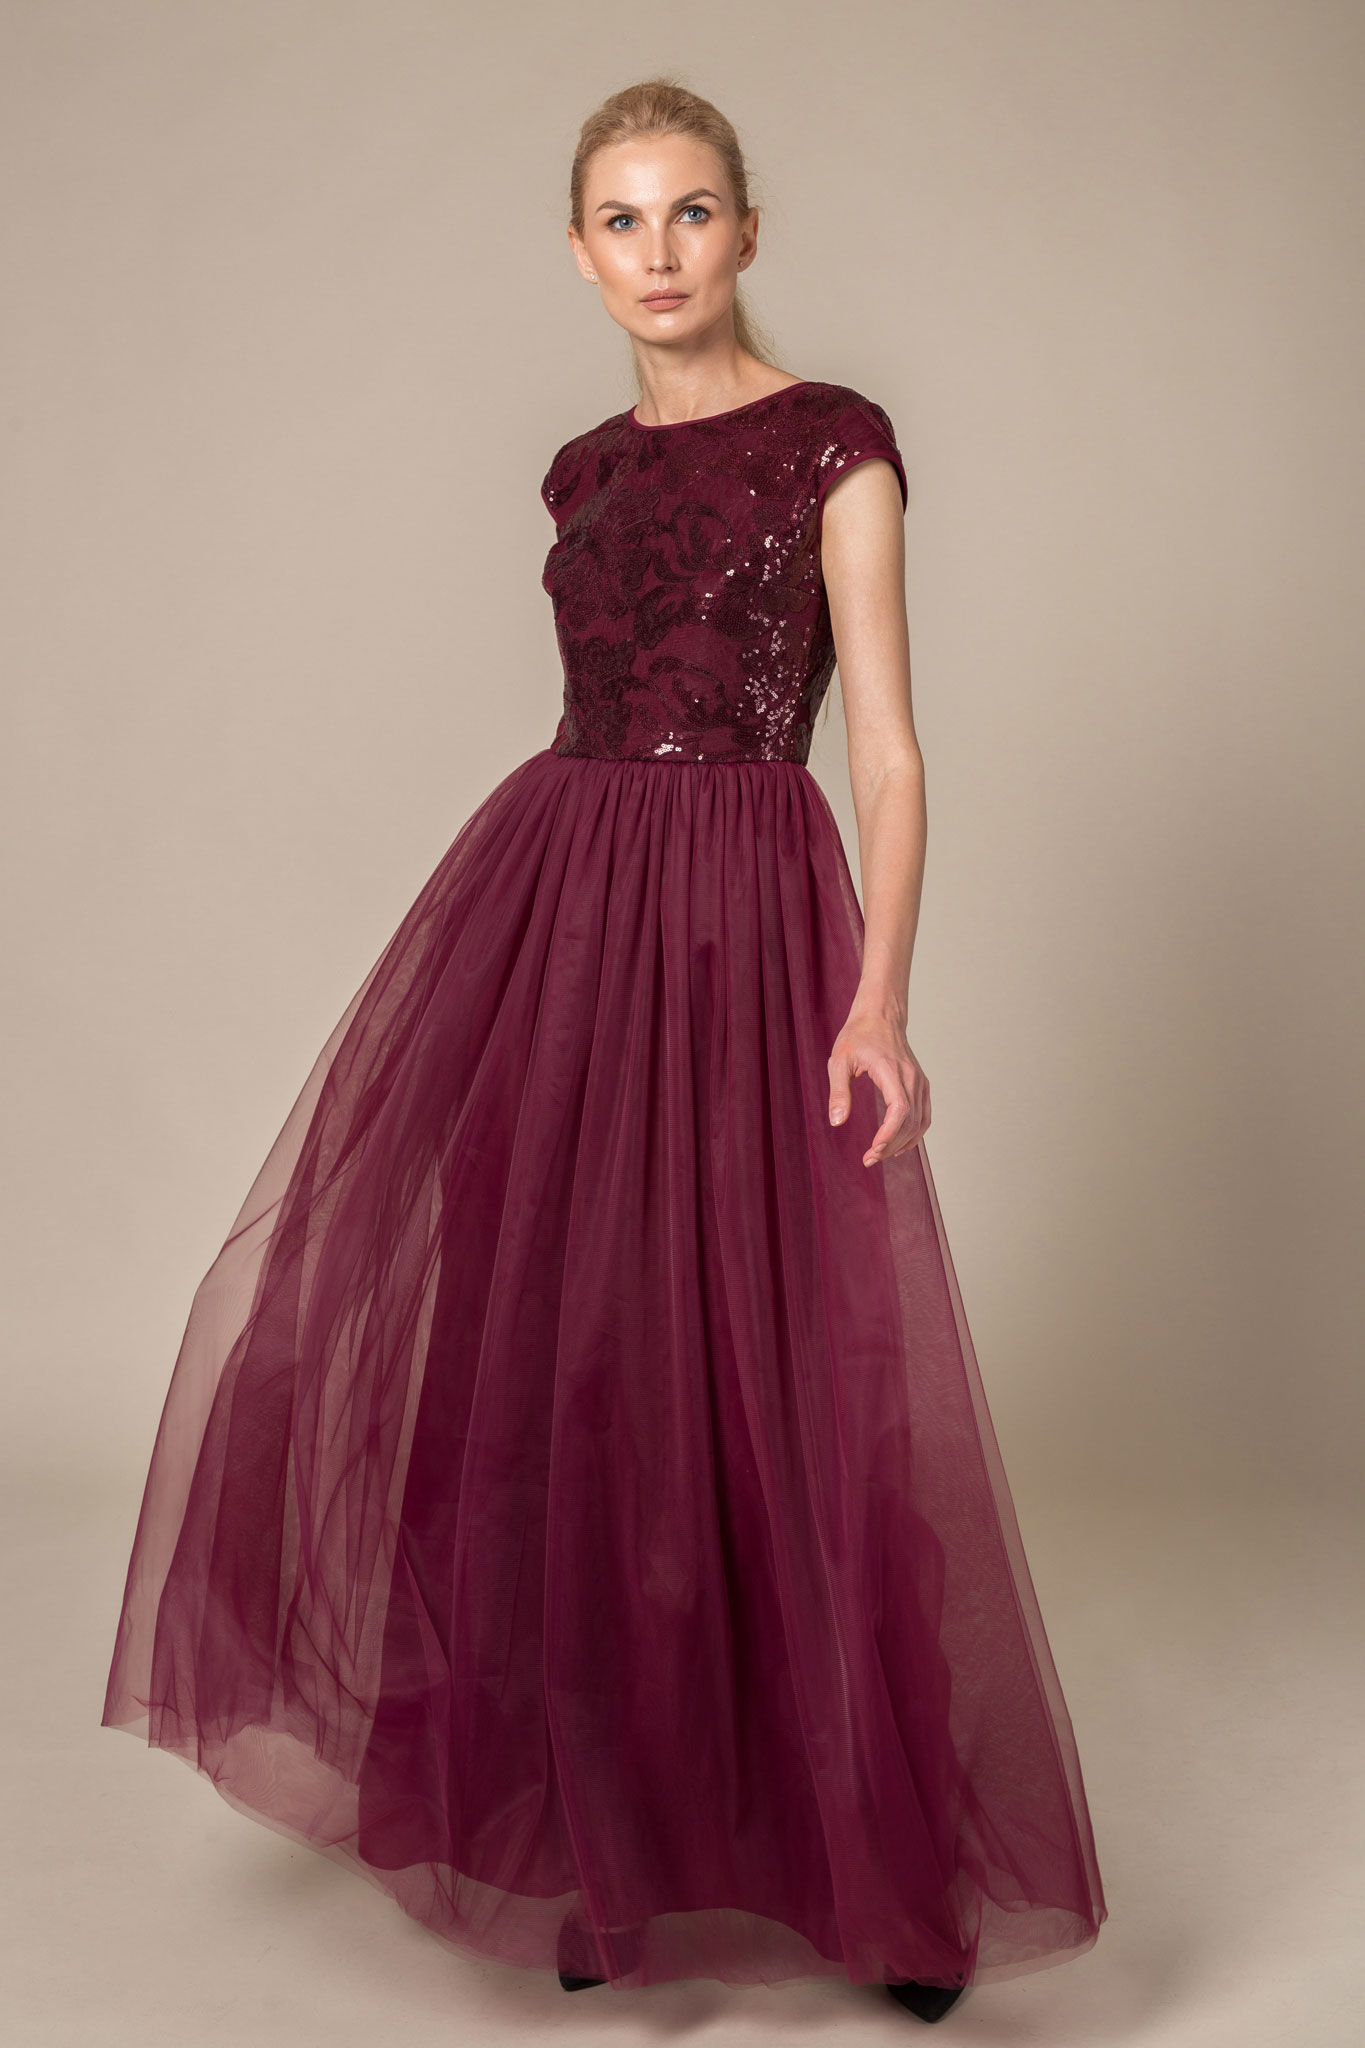 Burgundy Red Homecoming Two-Piece Dress - PromGirl